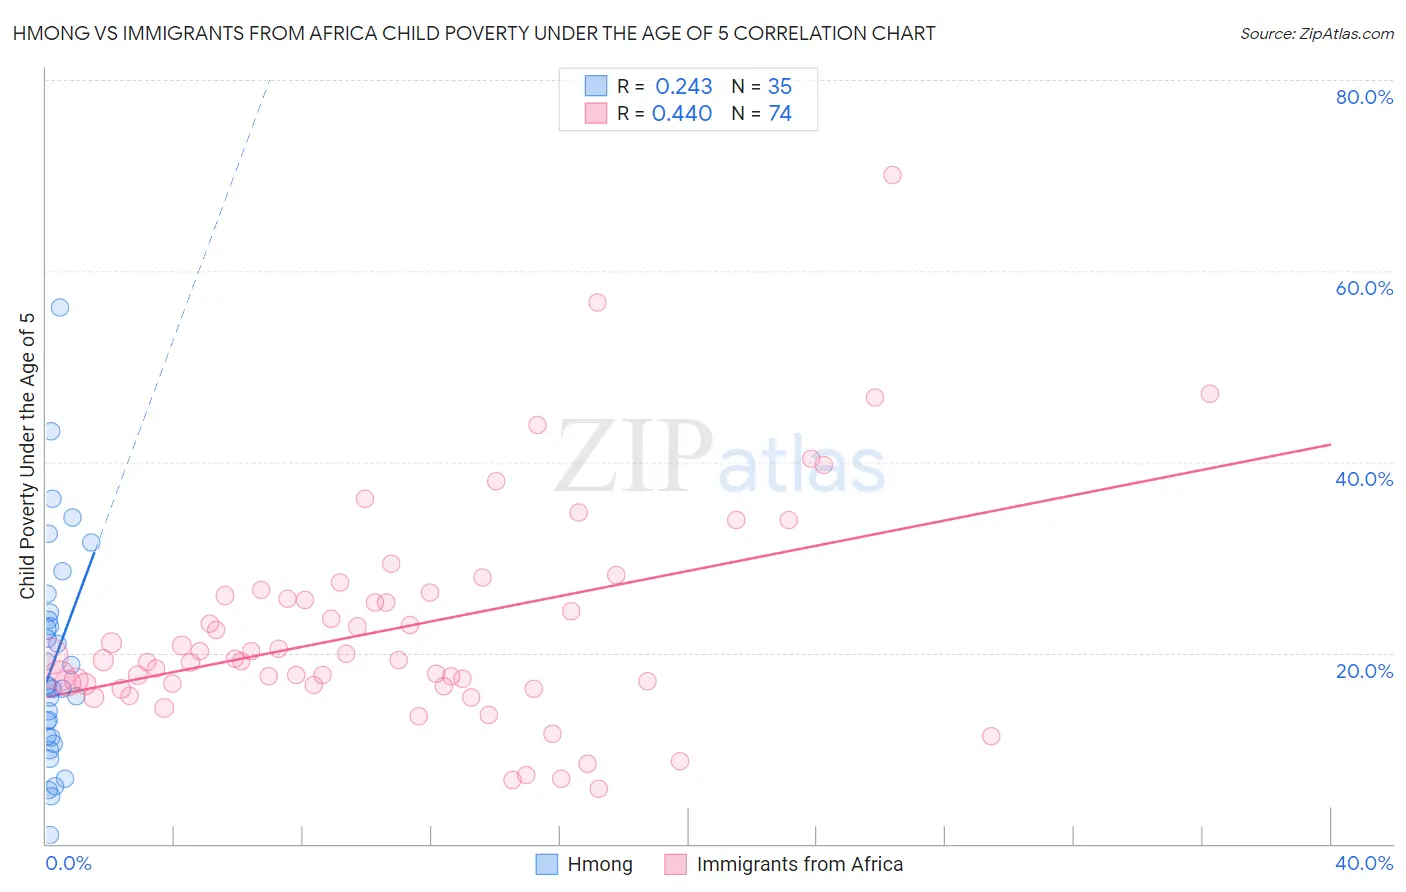 Hmong vs Immigrants from Africa Child Poverty Under the Age of 5